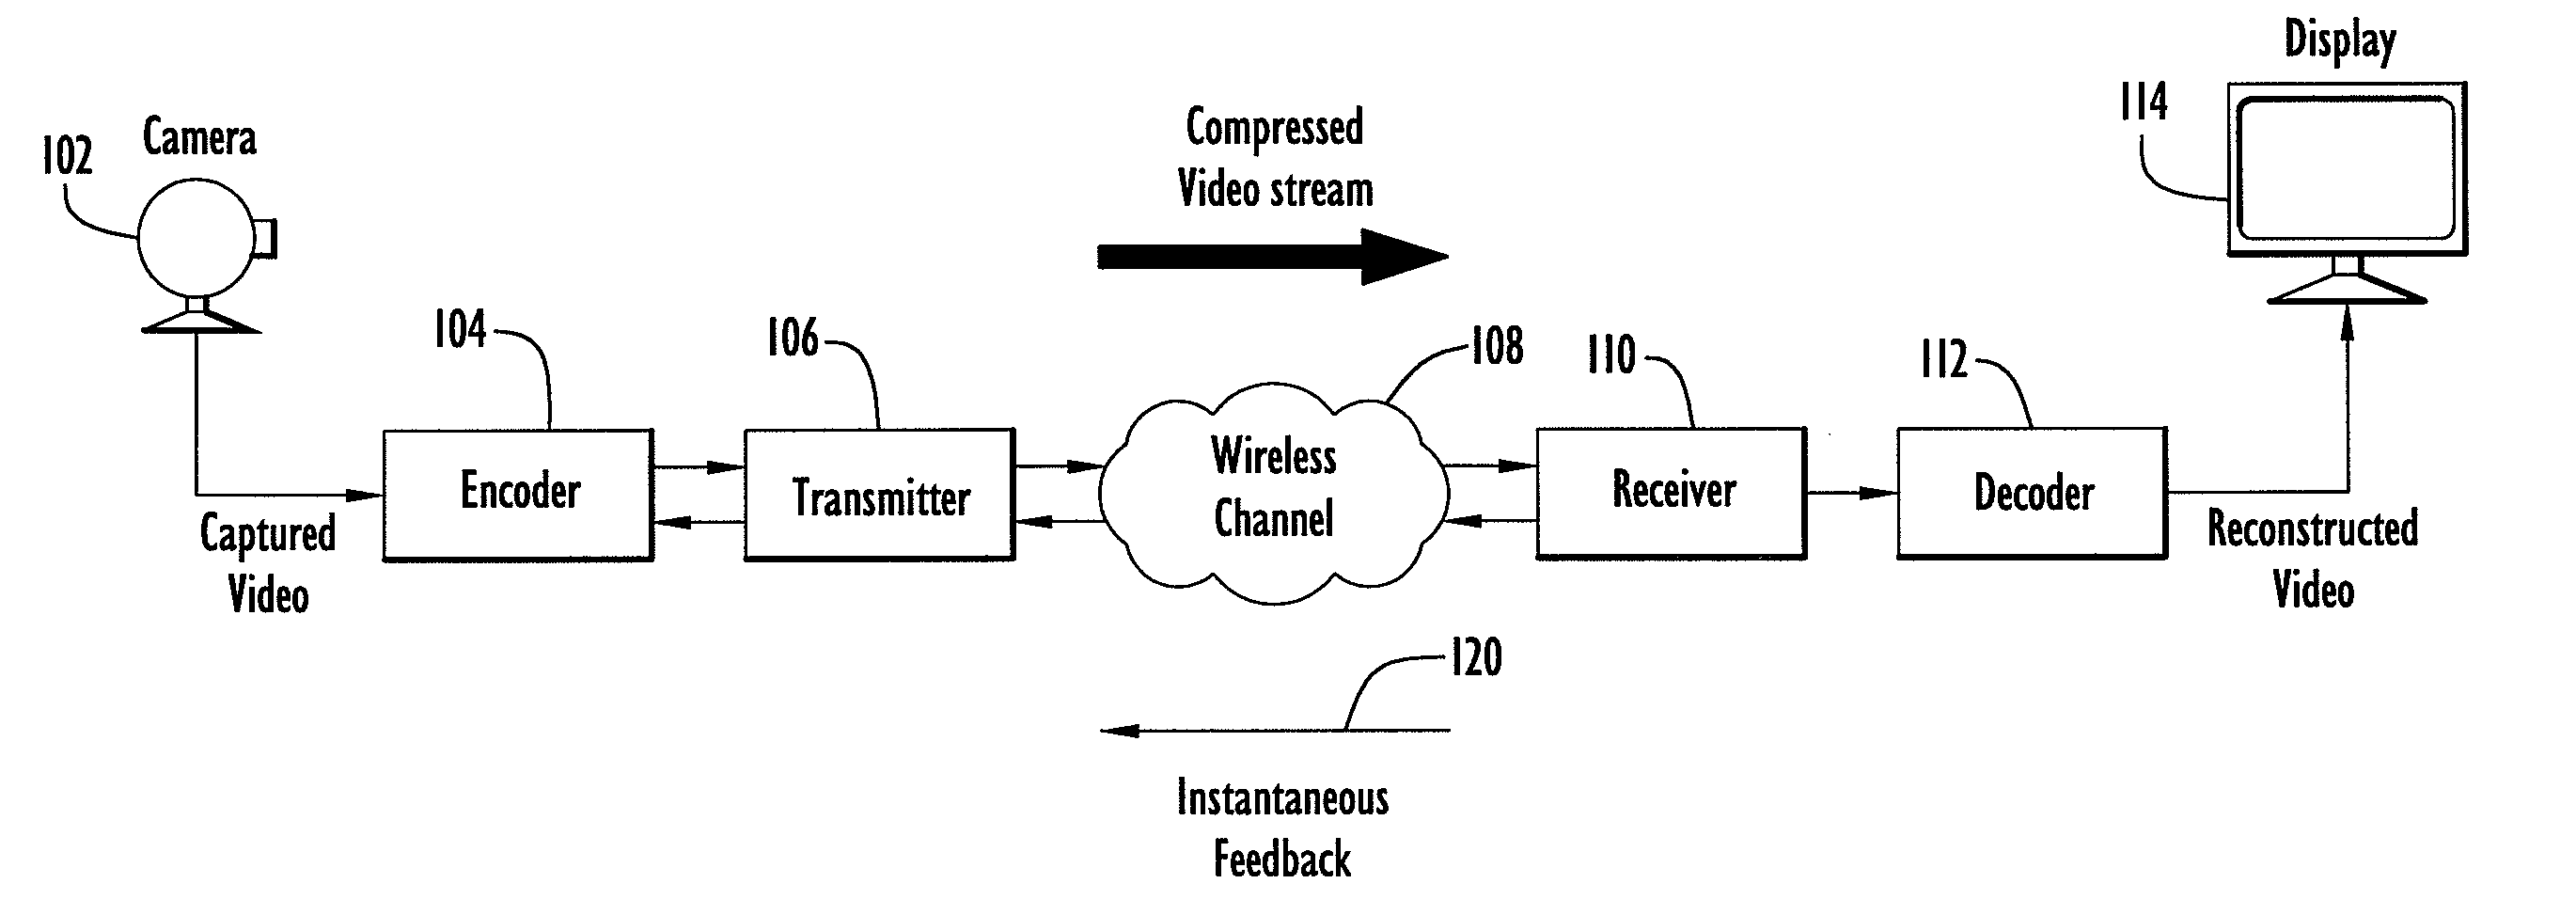 Error Resilient Video Transmission Using Instantaneous Receiver Feedback and Channel Quality Adaptive Packet Retransmission